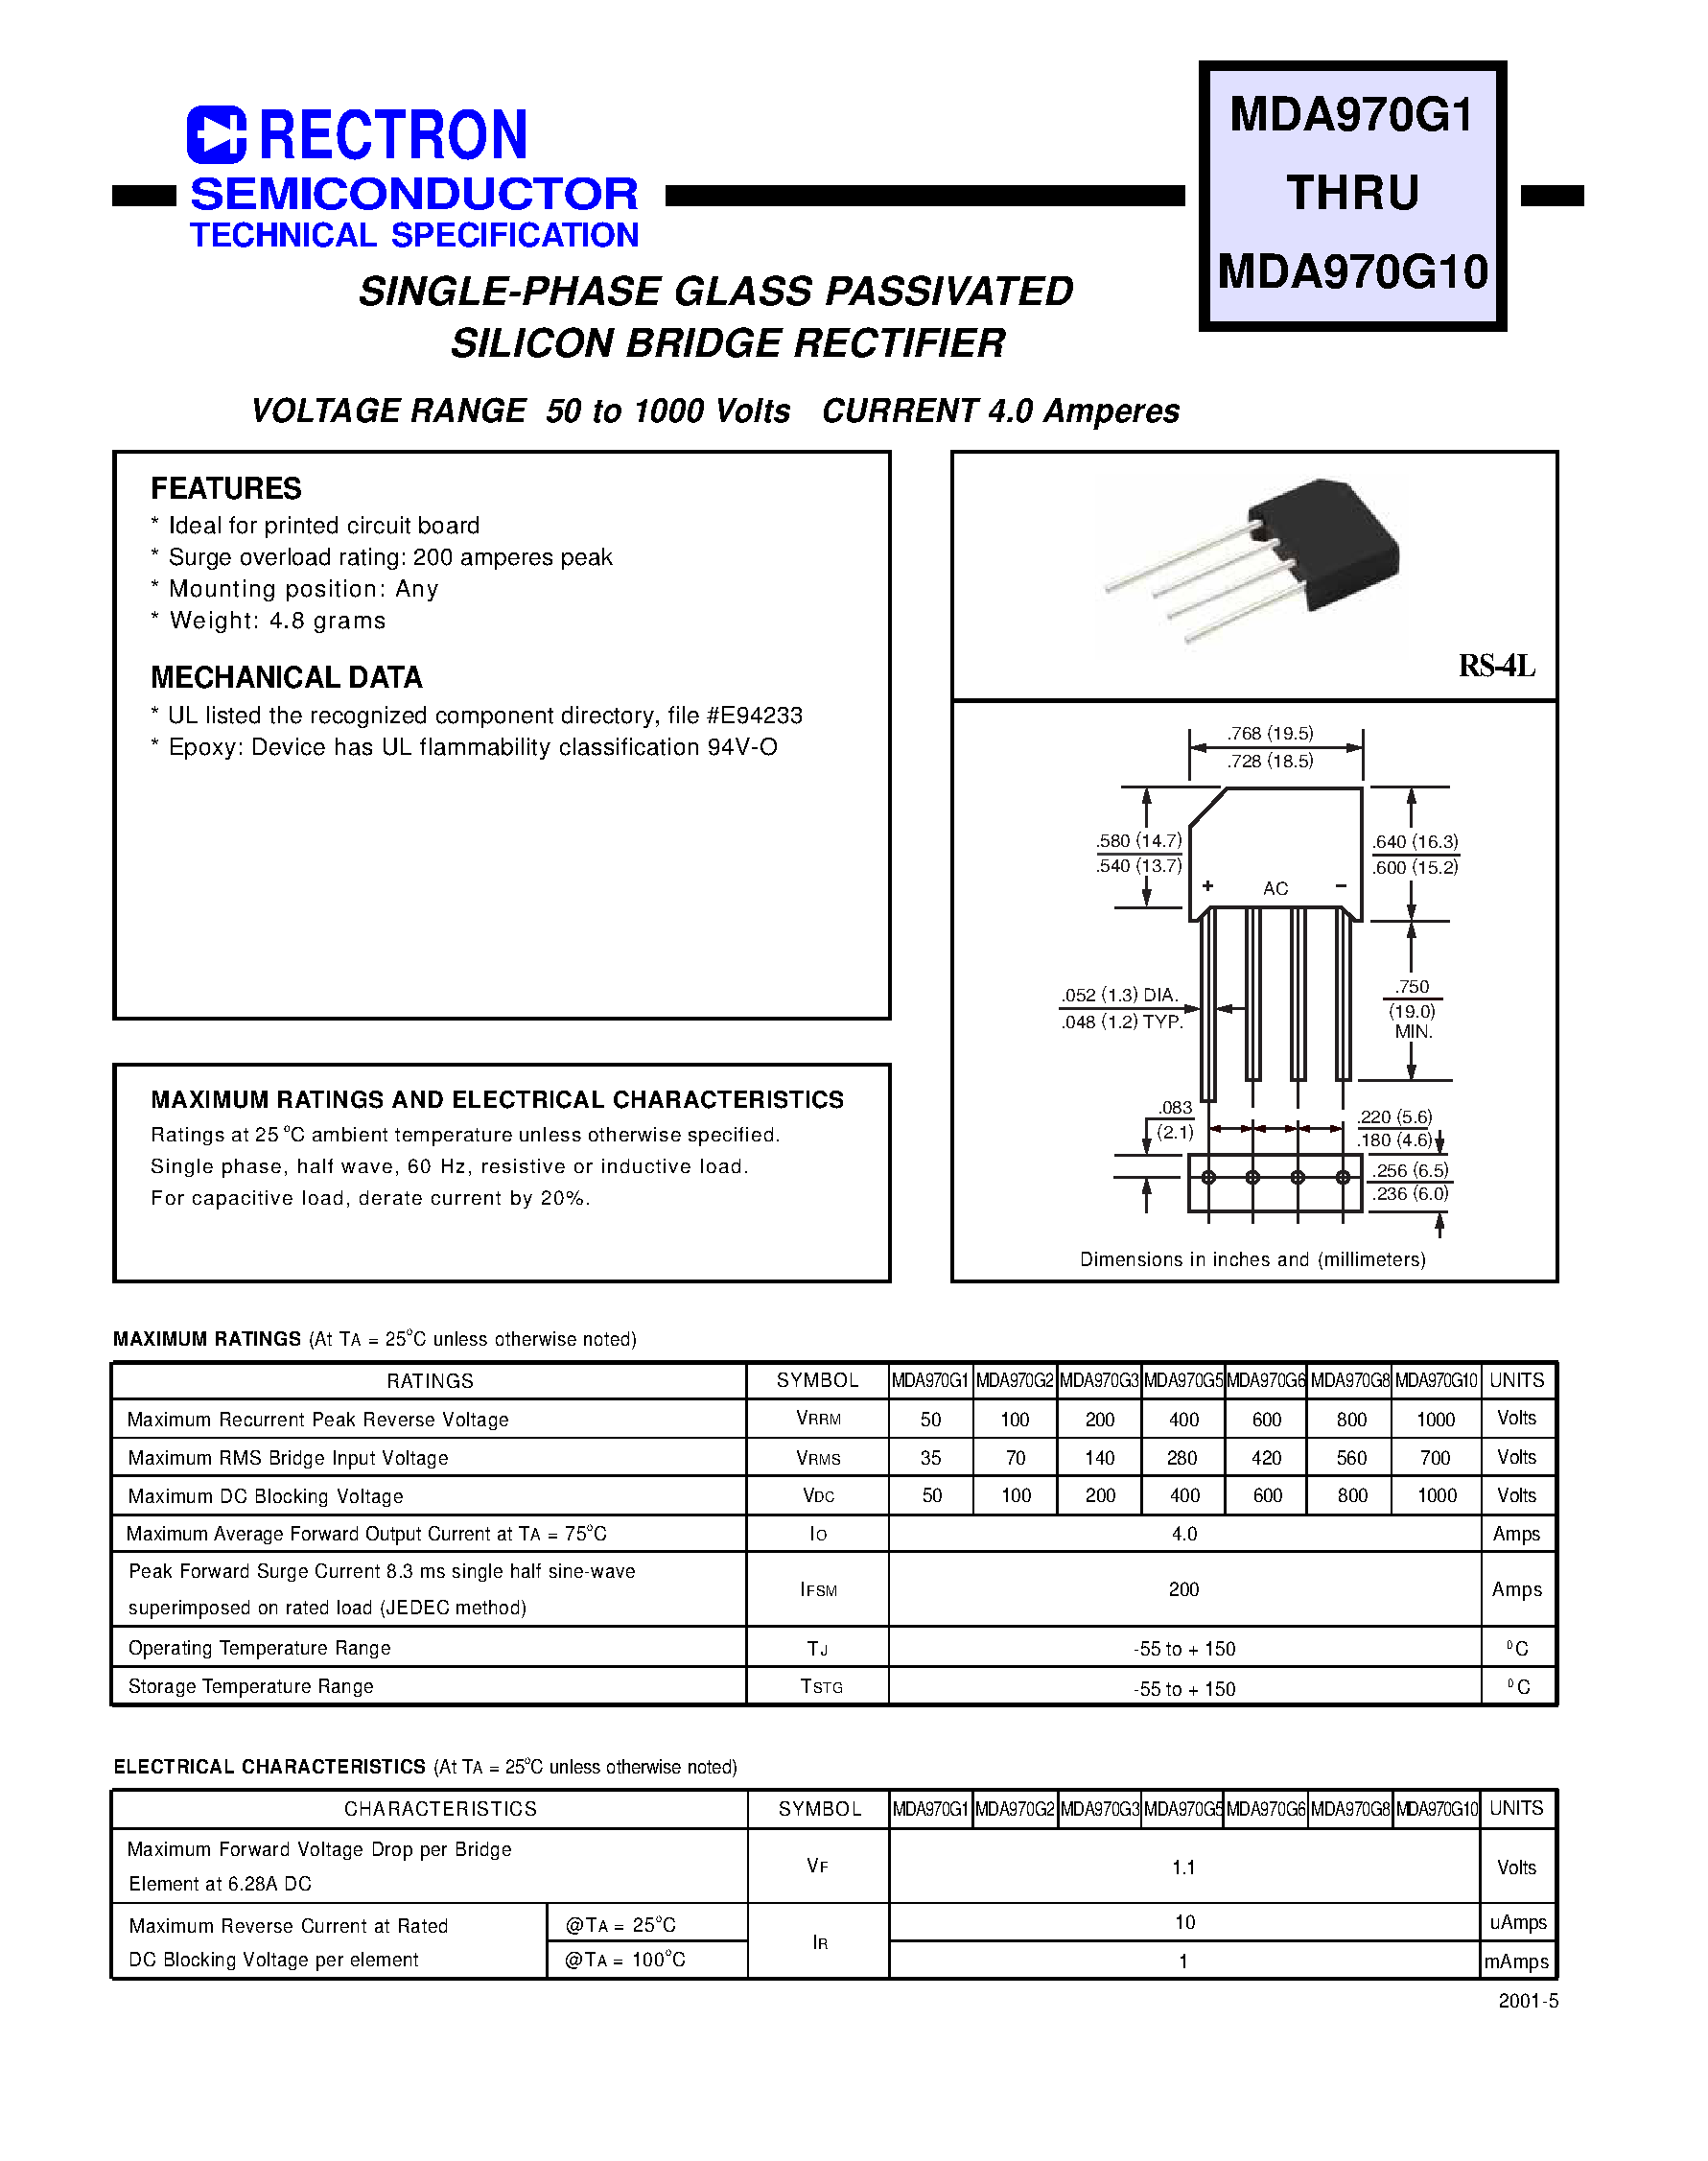 Datasheet MDA970G6 - SINGLE-PHASE GLASS PASSIVATED SILICON BRIDGE RECTIFIER (VOLTAGE RANGE 50 to 1000 Volts CURRENT 4.0 Amperes) page 1